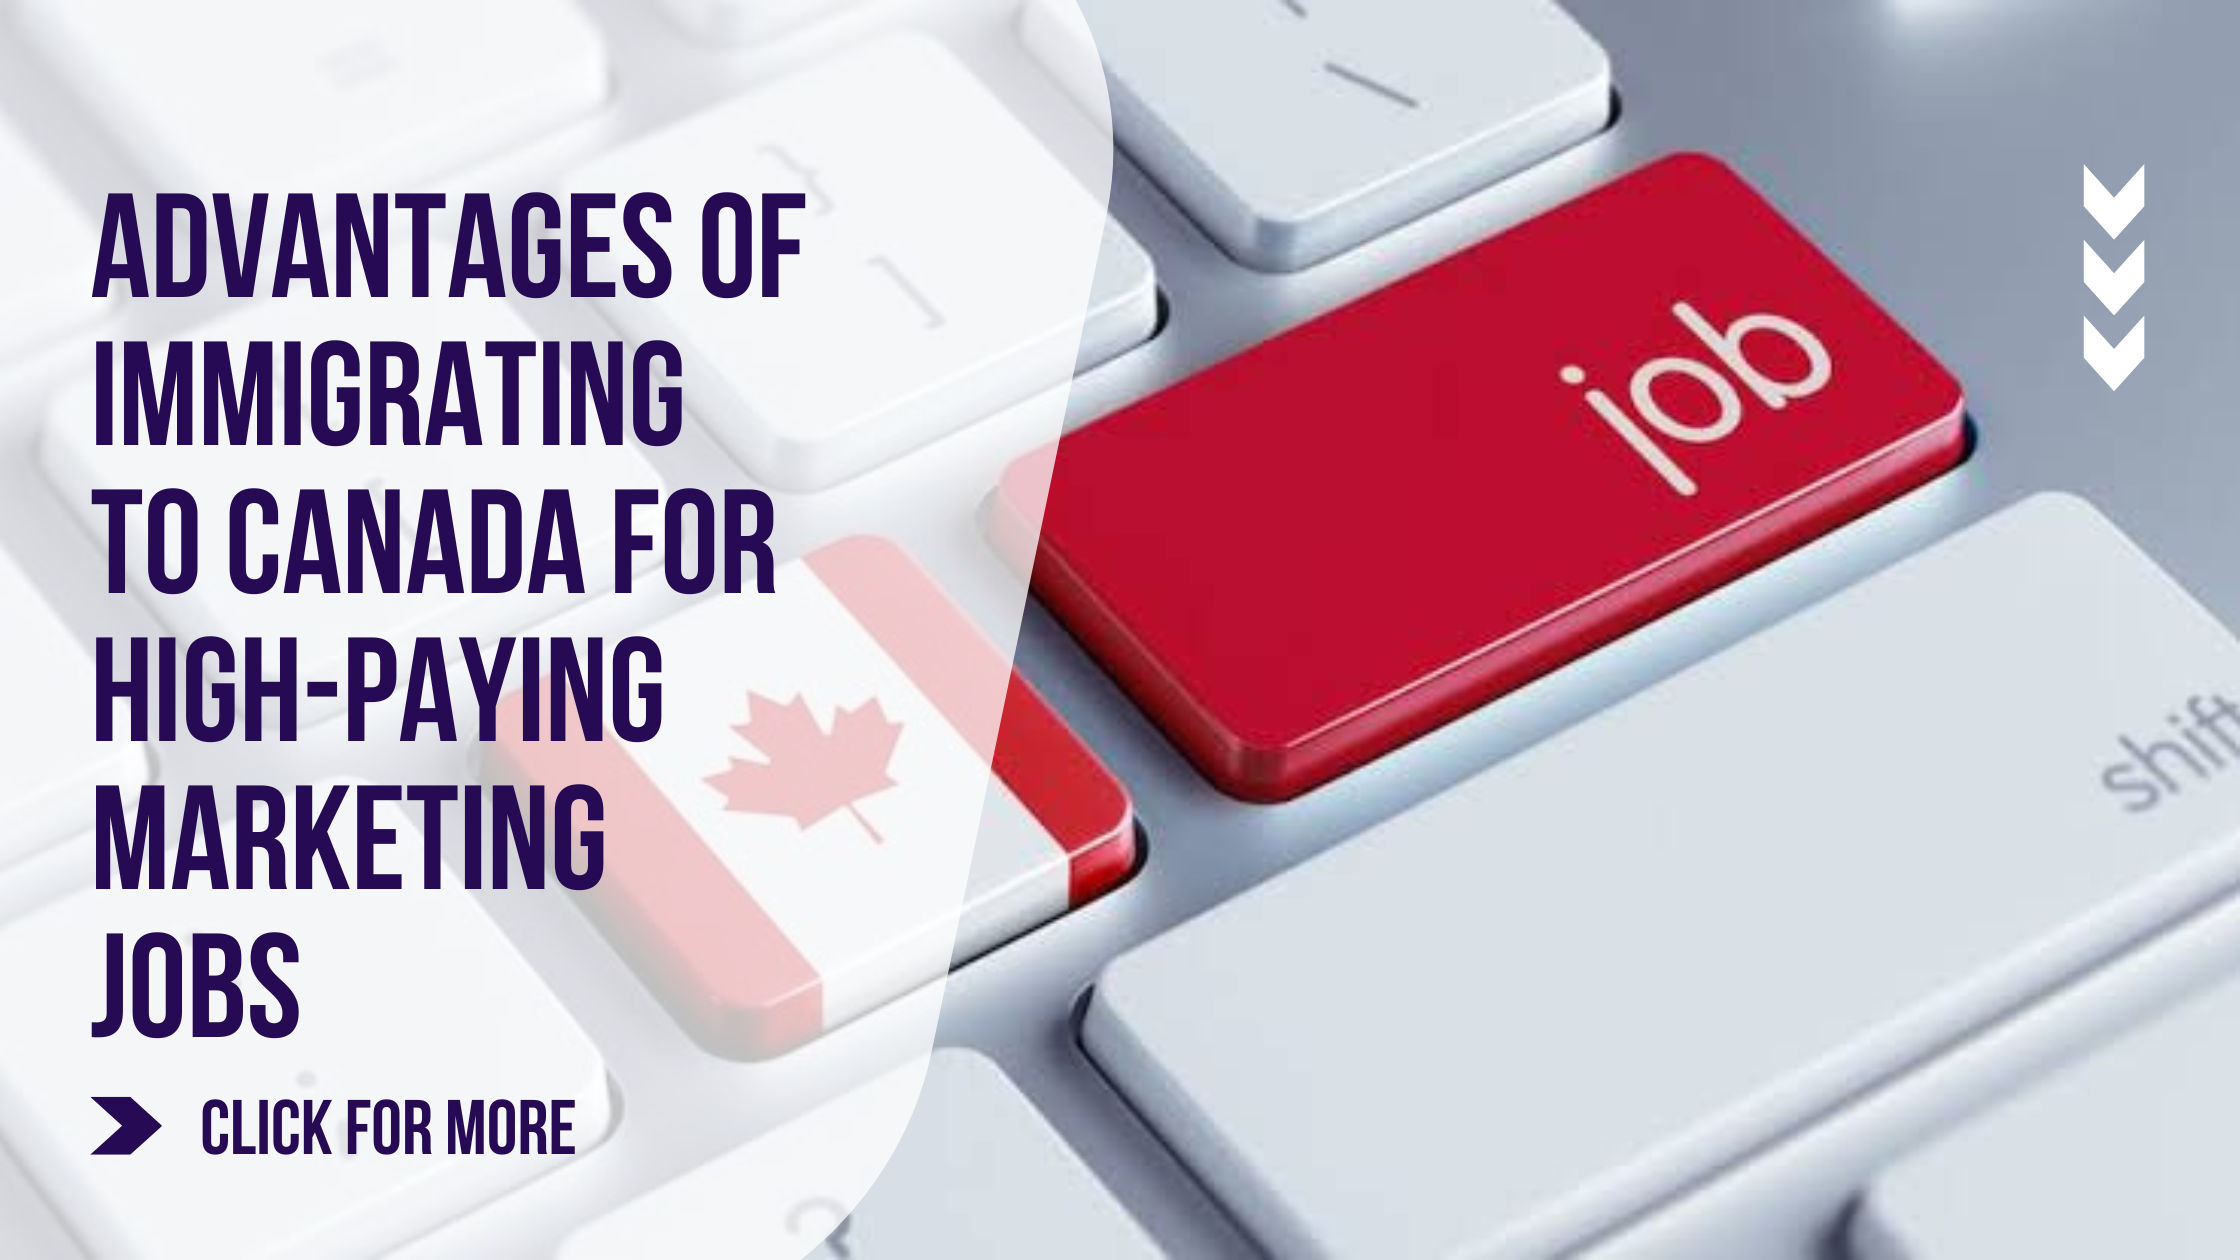 The Advantages of Immigrating to Canada for High-Paying Marketing Jobs